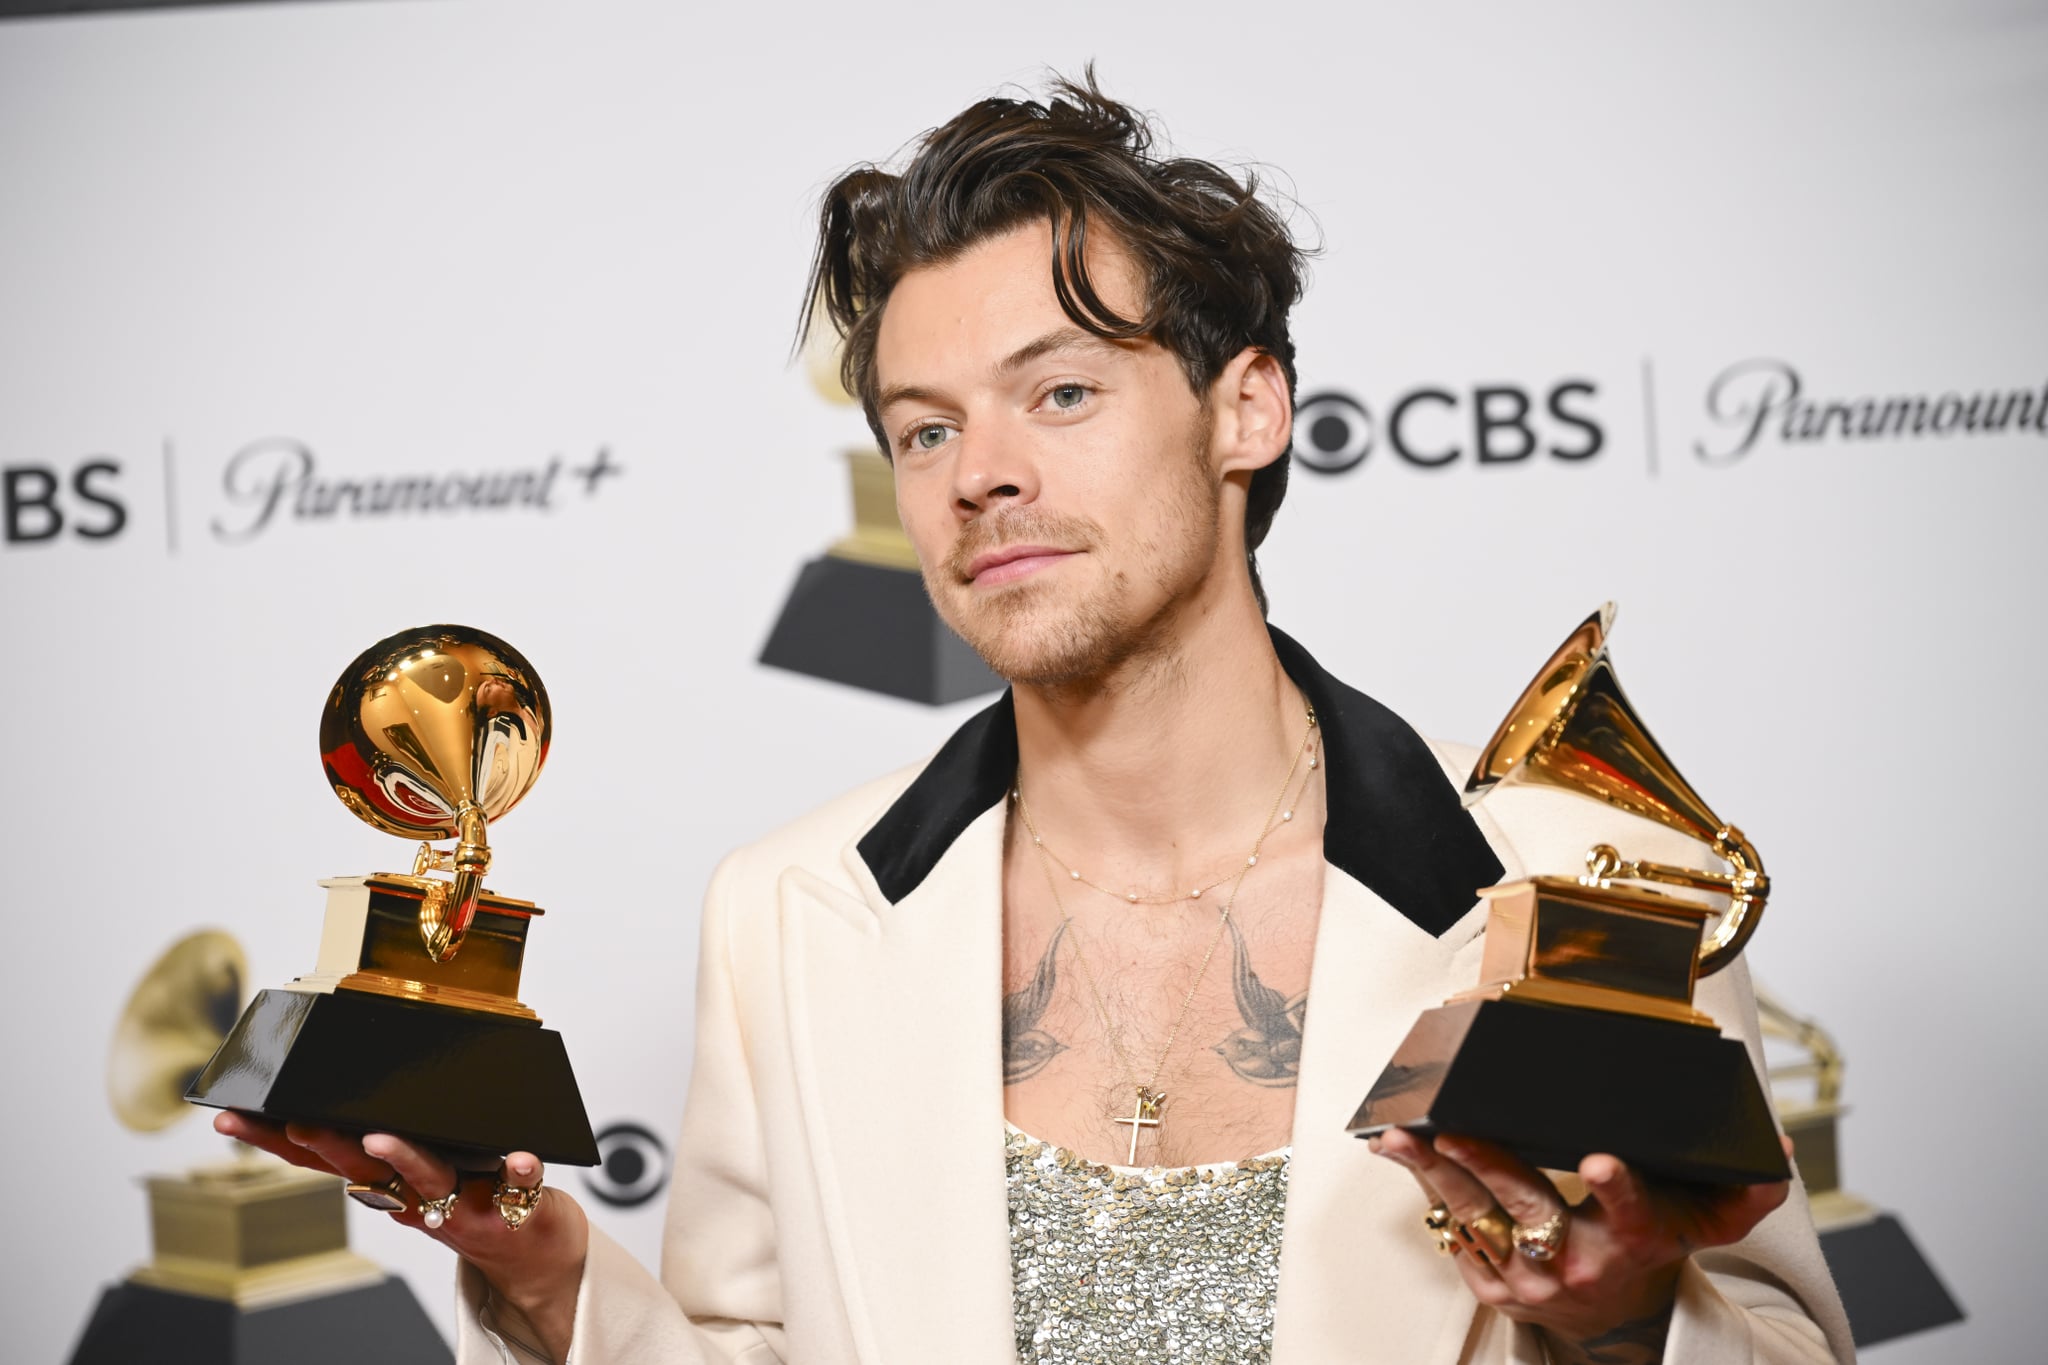 Harry Styles poses with his GRAMMY awards for Best Pop Vocal Album and Album of the Year for Harrys House in the Press Room at the 65th Annual GRAMMY Awards held at Crypto.com Arena on February 5, 2023 in Los Angeles, California. (Photo by Michael Buckner/Variety via Getty Images)